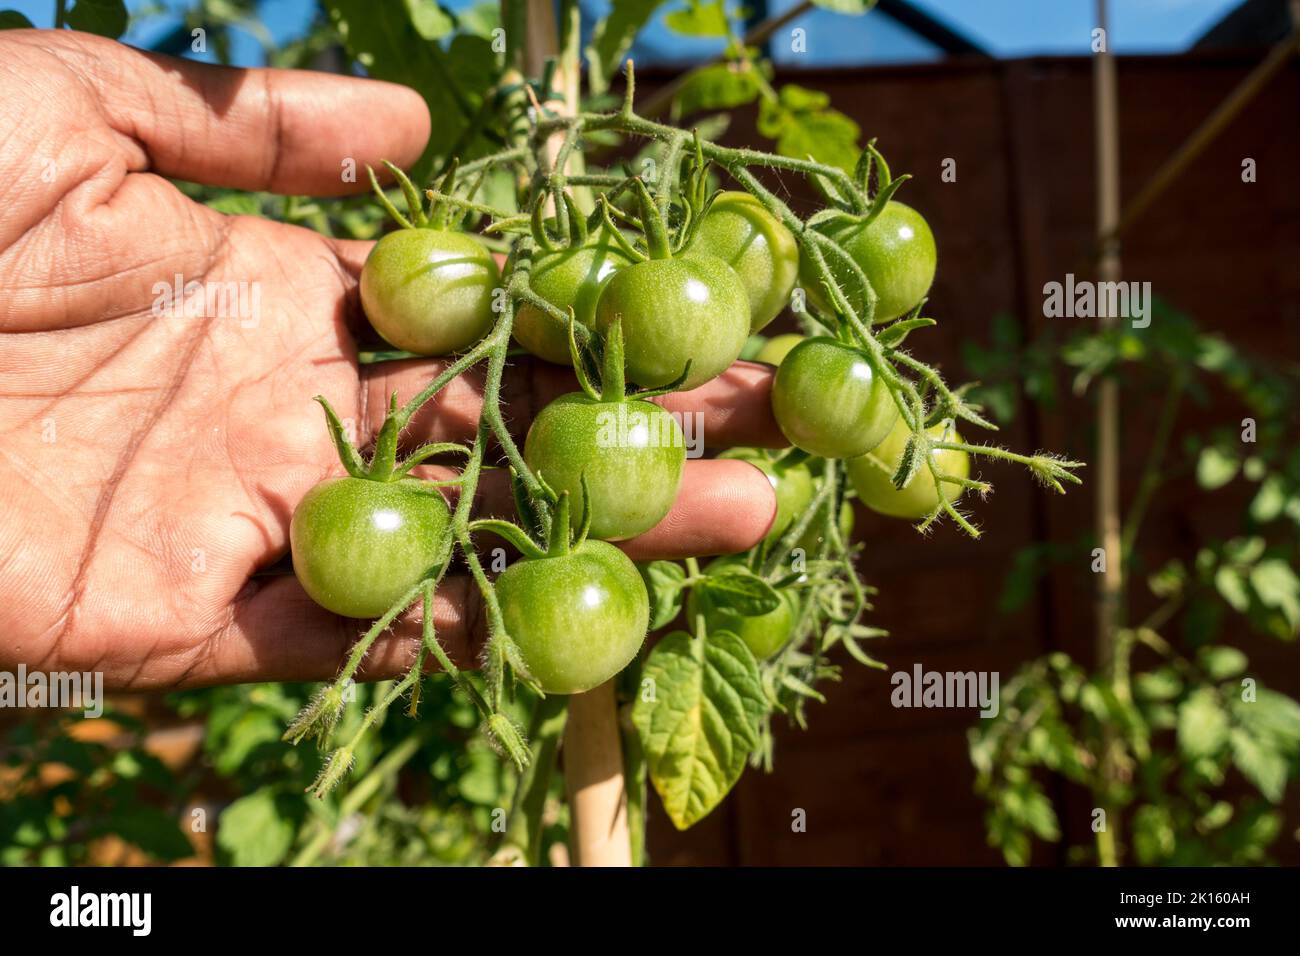 Adult male holding a bunch of green tomatoes on the plant Stock Photo